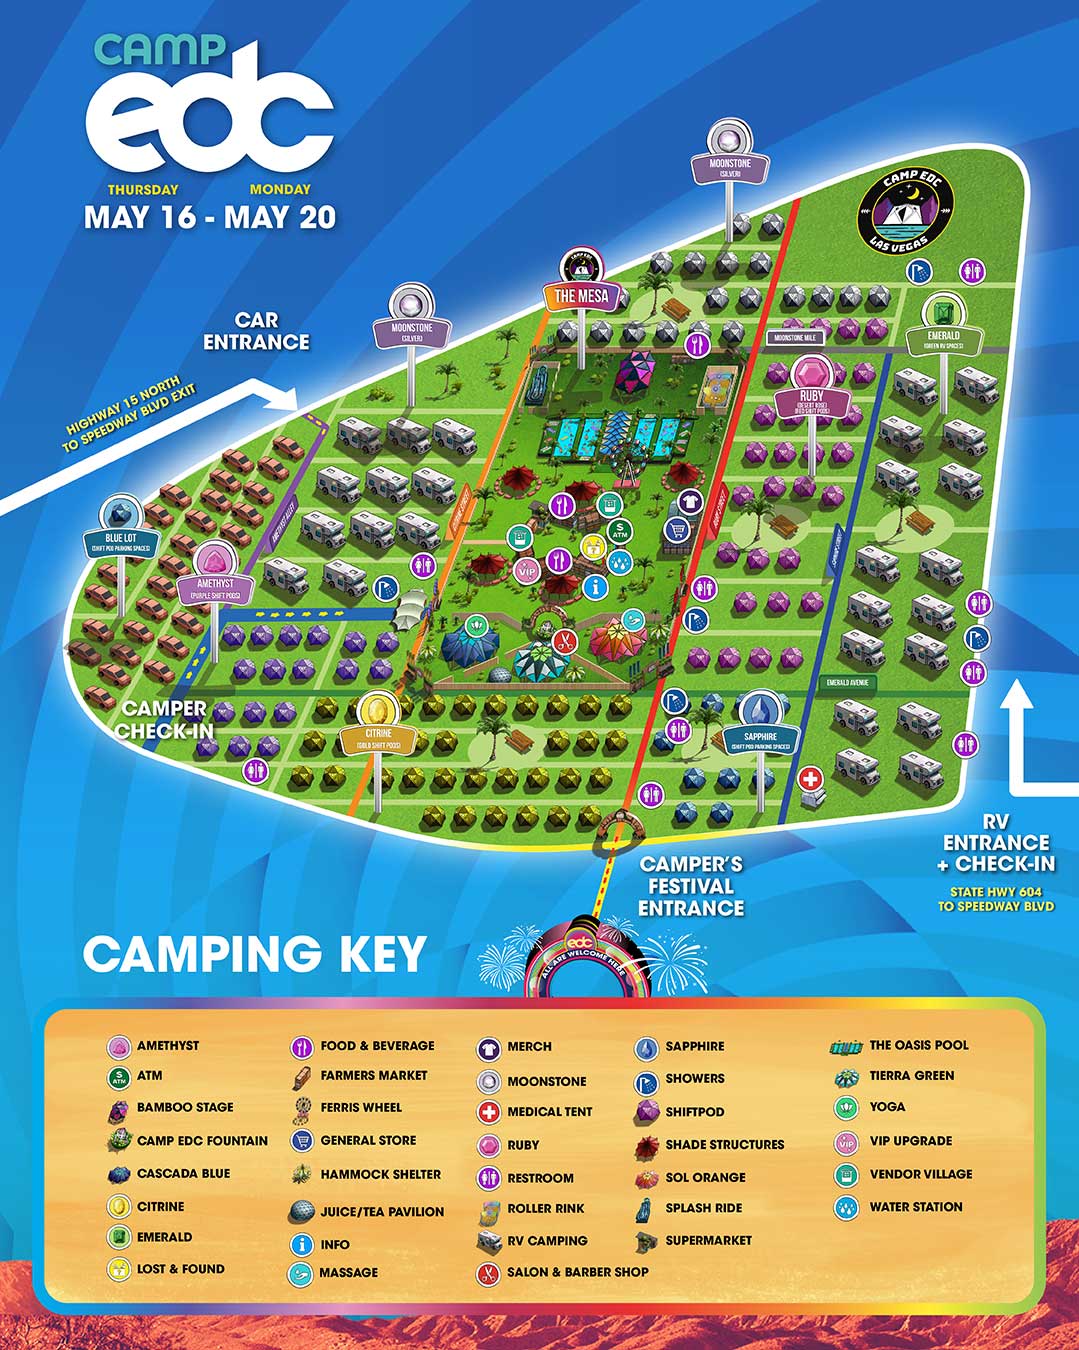 Camp EDC 2019 Guide: Map, Party Schedule, Gallery + More — Electric Vibes